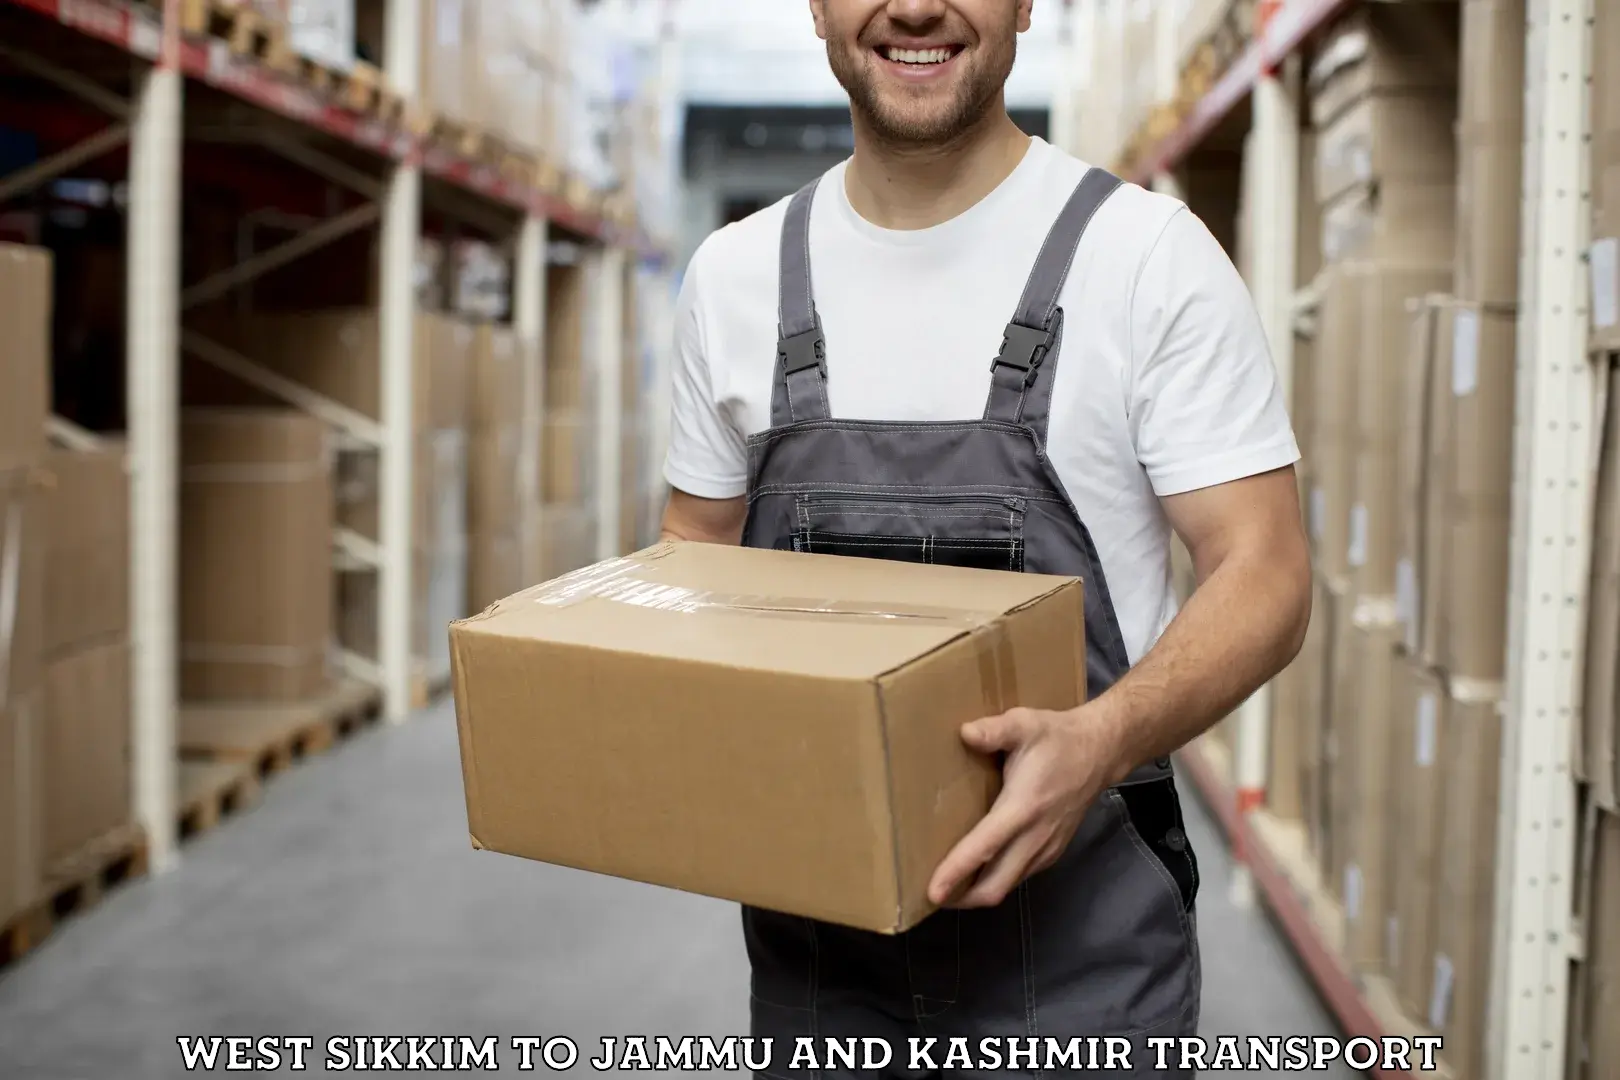 Two wheeler parcel service West Sikkim to Jammu and Kashmir